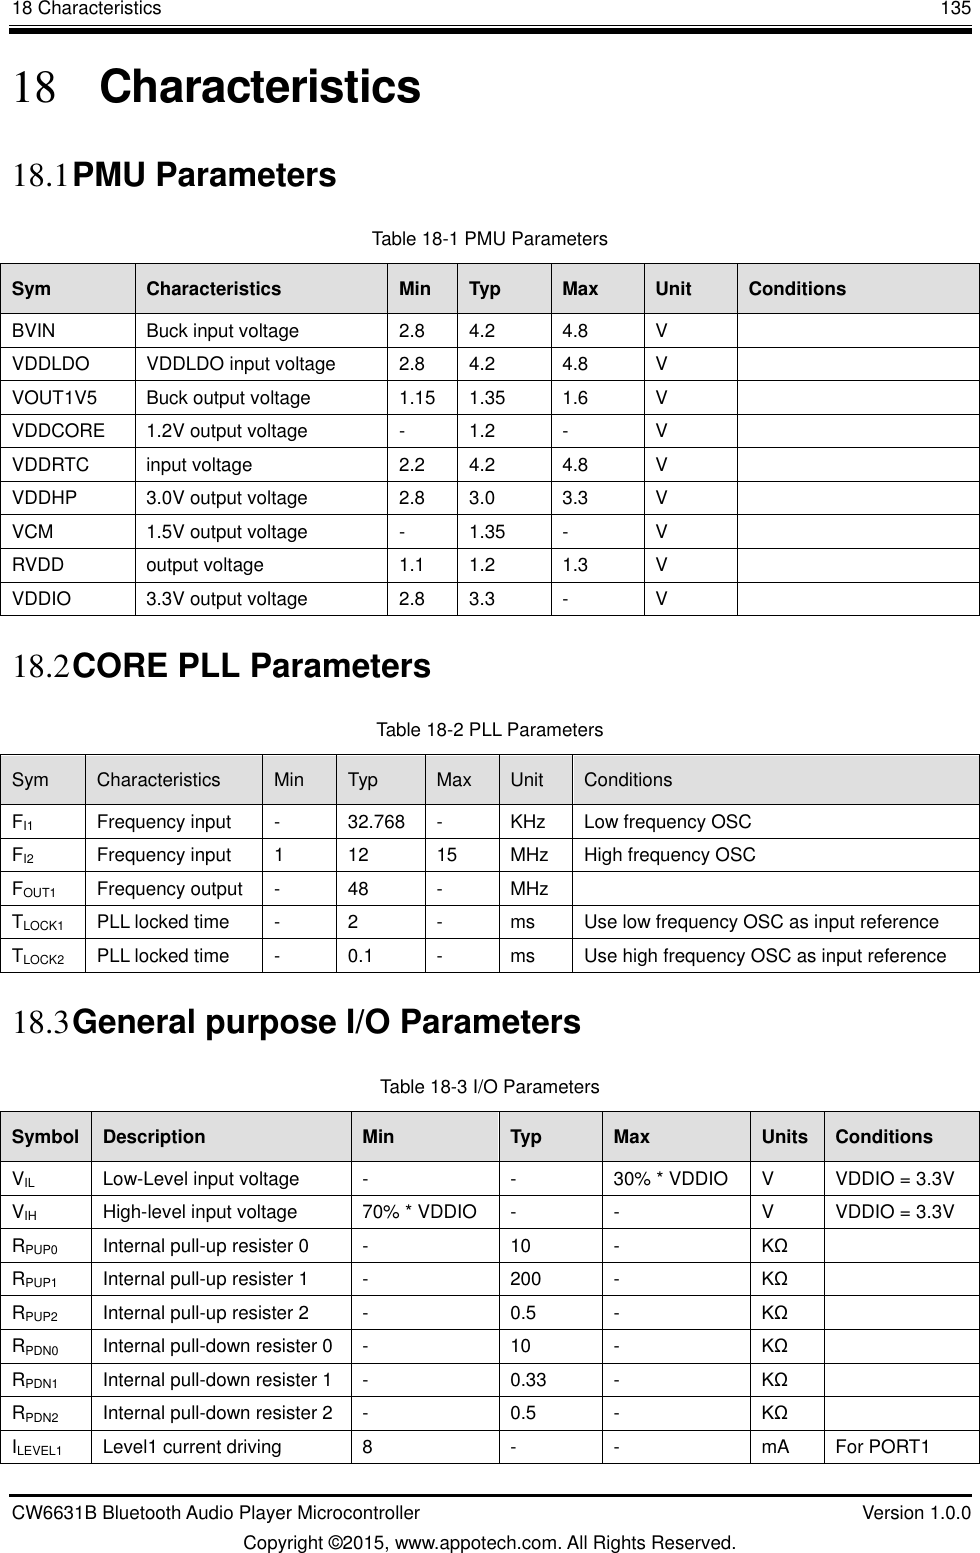 18 Characteristics       135 CW6631B Bluetooth Audio Player Microcontroller    Version 1.0.0 Copyright ©2015, www.appotech.com. All Rights Reserved. 18 Characteristics 18.1 PMU Parameters Table 18-1 PMU Parameters Sym  Characteristics  Min  Typ  Max  Unit  Conditions BVIN  Buck input voltage  2.8  4.2  4.8  V   VDDLDO  VDDLDO input voltage  2.8  4.2  4.8  V   VOUT1V5  Buck output voltage  1.15  1.35  1.6  V   VDDCORE  1.2V output voltage  -  1.2  -  V   VDDRTC  input voltage  2.2  4.2  4.8  V   VDDHP  3.0V output voltage  2.8  3.0  3.3  V   VCM  1.5V output voltage  -  1.35  -  V   RVDD  output voltage  1.1  1.2  1.3  V   VDDIO  3.3V output voltage  2.8  3.3  -  V   18.2 CORE PLL Parameters Table 18-2 PLL Parameters Sym  Characteristics  Min  Typ  Max  Unit  Conditions FI1  Frequency input  -  32.768  -  KHz  Low frequency OSC FI2  Frequency input  1  12 15  MHz  High frequency OSC FOUT1  Frequency output  -  48  -  MHz   TLOCK1  PLL locked time  -  2  -  ms  Use low frequency OSC as input reference TLOCK2  PLL locked time  -  0.1  -  ms  Use high frequency OSC as input reference 18.3 General purpose I/O Parameters Table 18-3 I/O Parameters Symbol  Description  Min  Typ  Max  Units  Conditions VIL  Low-Level input voltage  -  -  30% * VDDIO  V  VDDIO = 3.3V VIH High-level input voltage  70% * VDDIO  -  -  V  VDDIO = 3.3V RPUP0  Internal pull-up resister 0  -  10  -  KΩ   RPUP1  Internal pull-up resister 1  -  200  -  KΩ   RPUP2  Internal pull-up resister 2  -  0.5  -  KΩ   RPDN0  Internal pull-down resister 0  -  10  -  KΩ   RPDN1  Internal pull-down resister 1  -  0.33  -  KΩ   RPDN2  Internal pull-down resister 2  -  0.5  -  KΩ   ILEVEL1  Level1 current driving  8  -  -  mA  For PORT1 